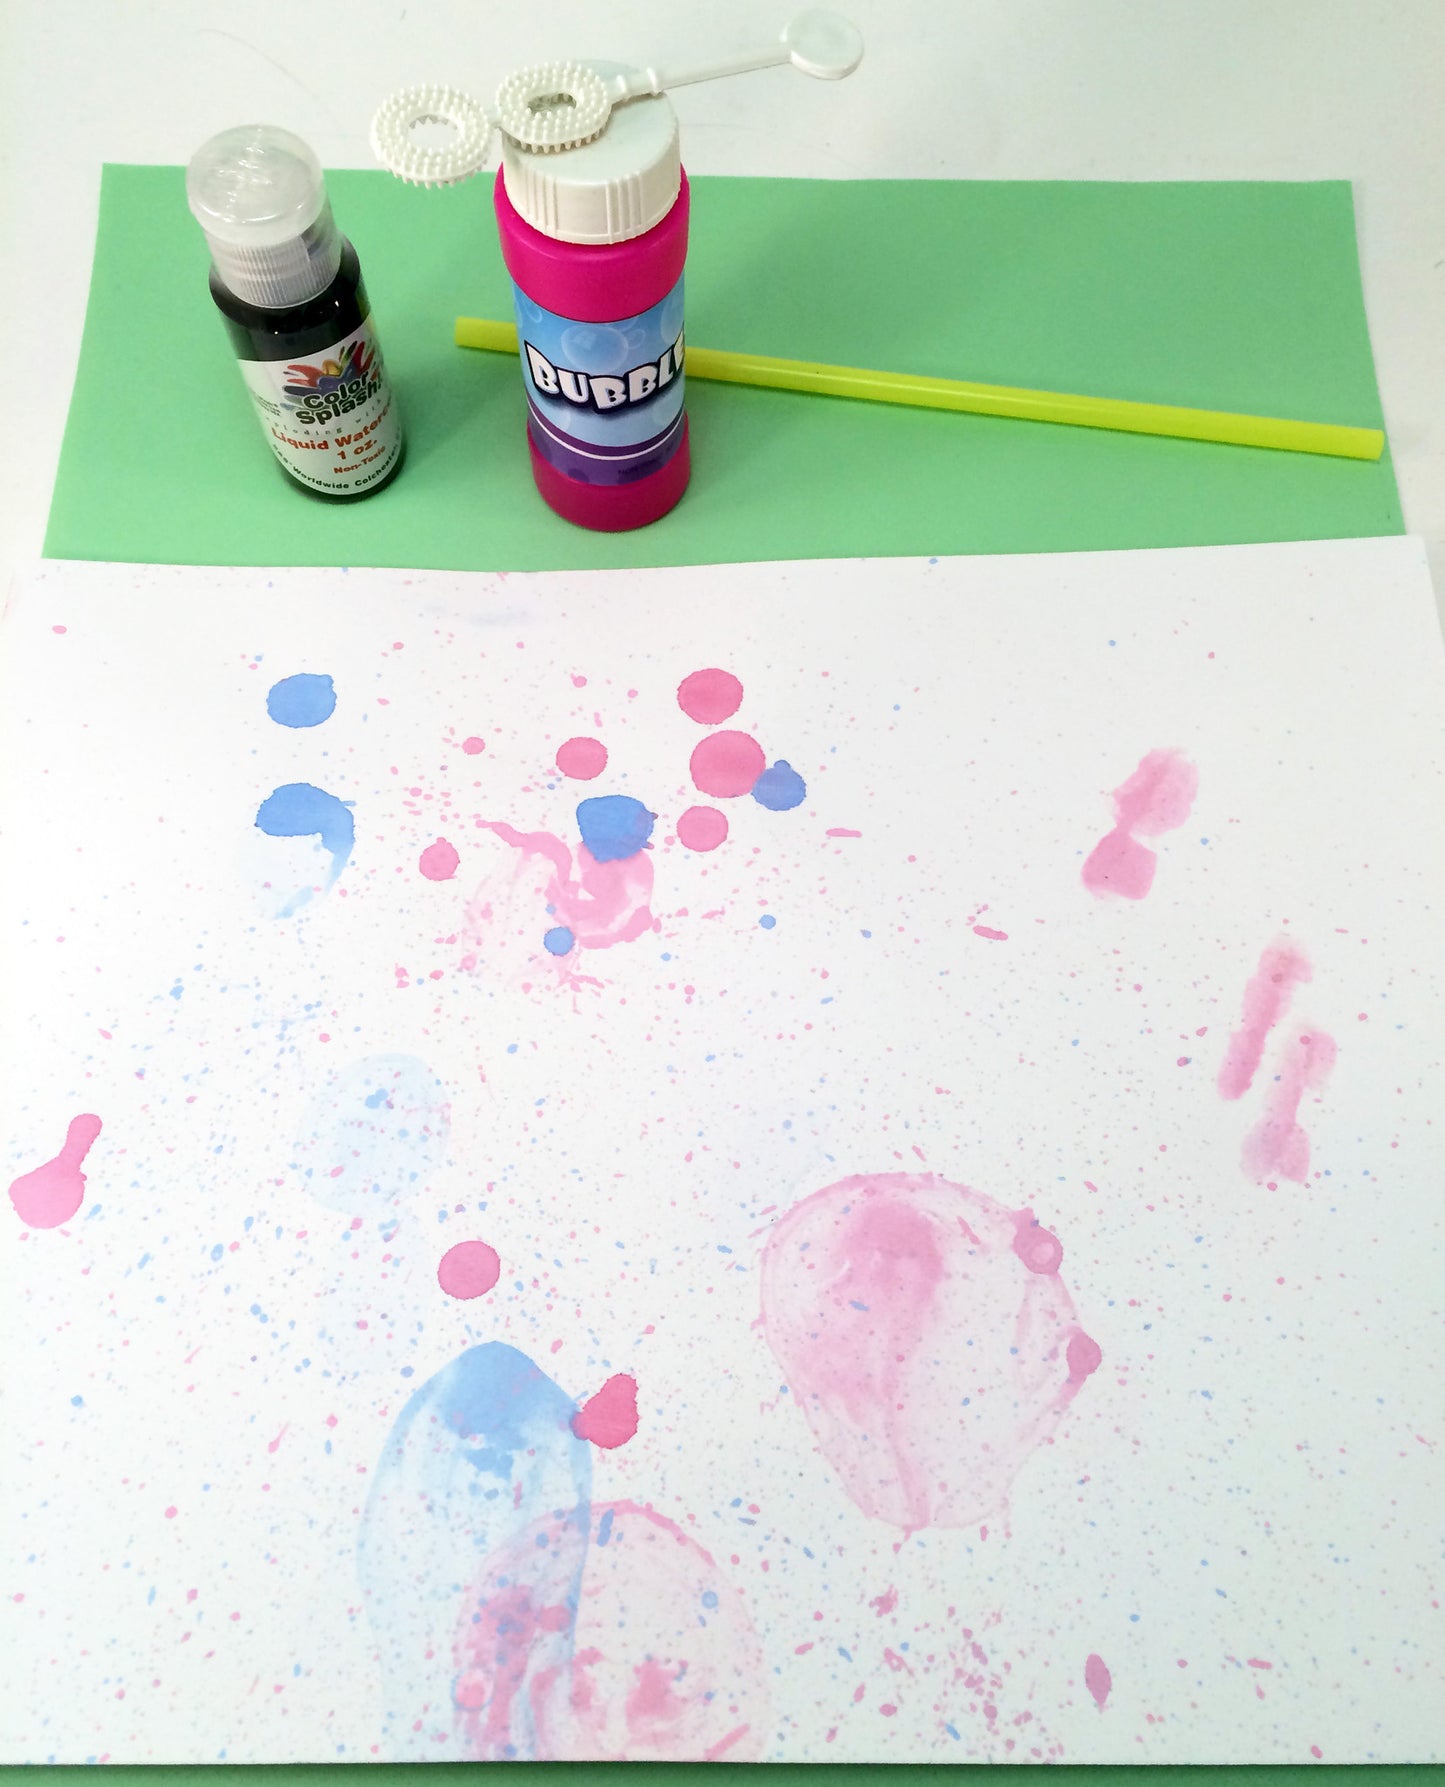 Bubble Painting, creative art activity using wind energy, to go along with May's Ivy Kids kit featuring the book The Wind Blew by Pat Hutchins. 